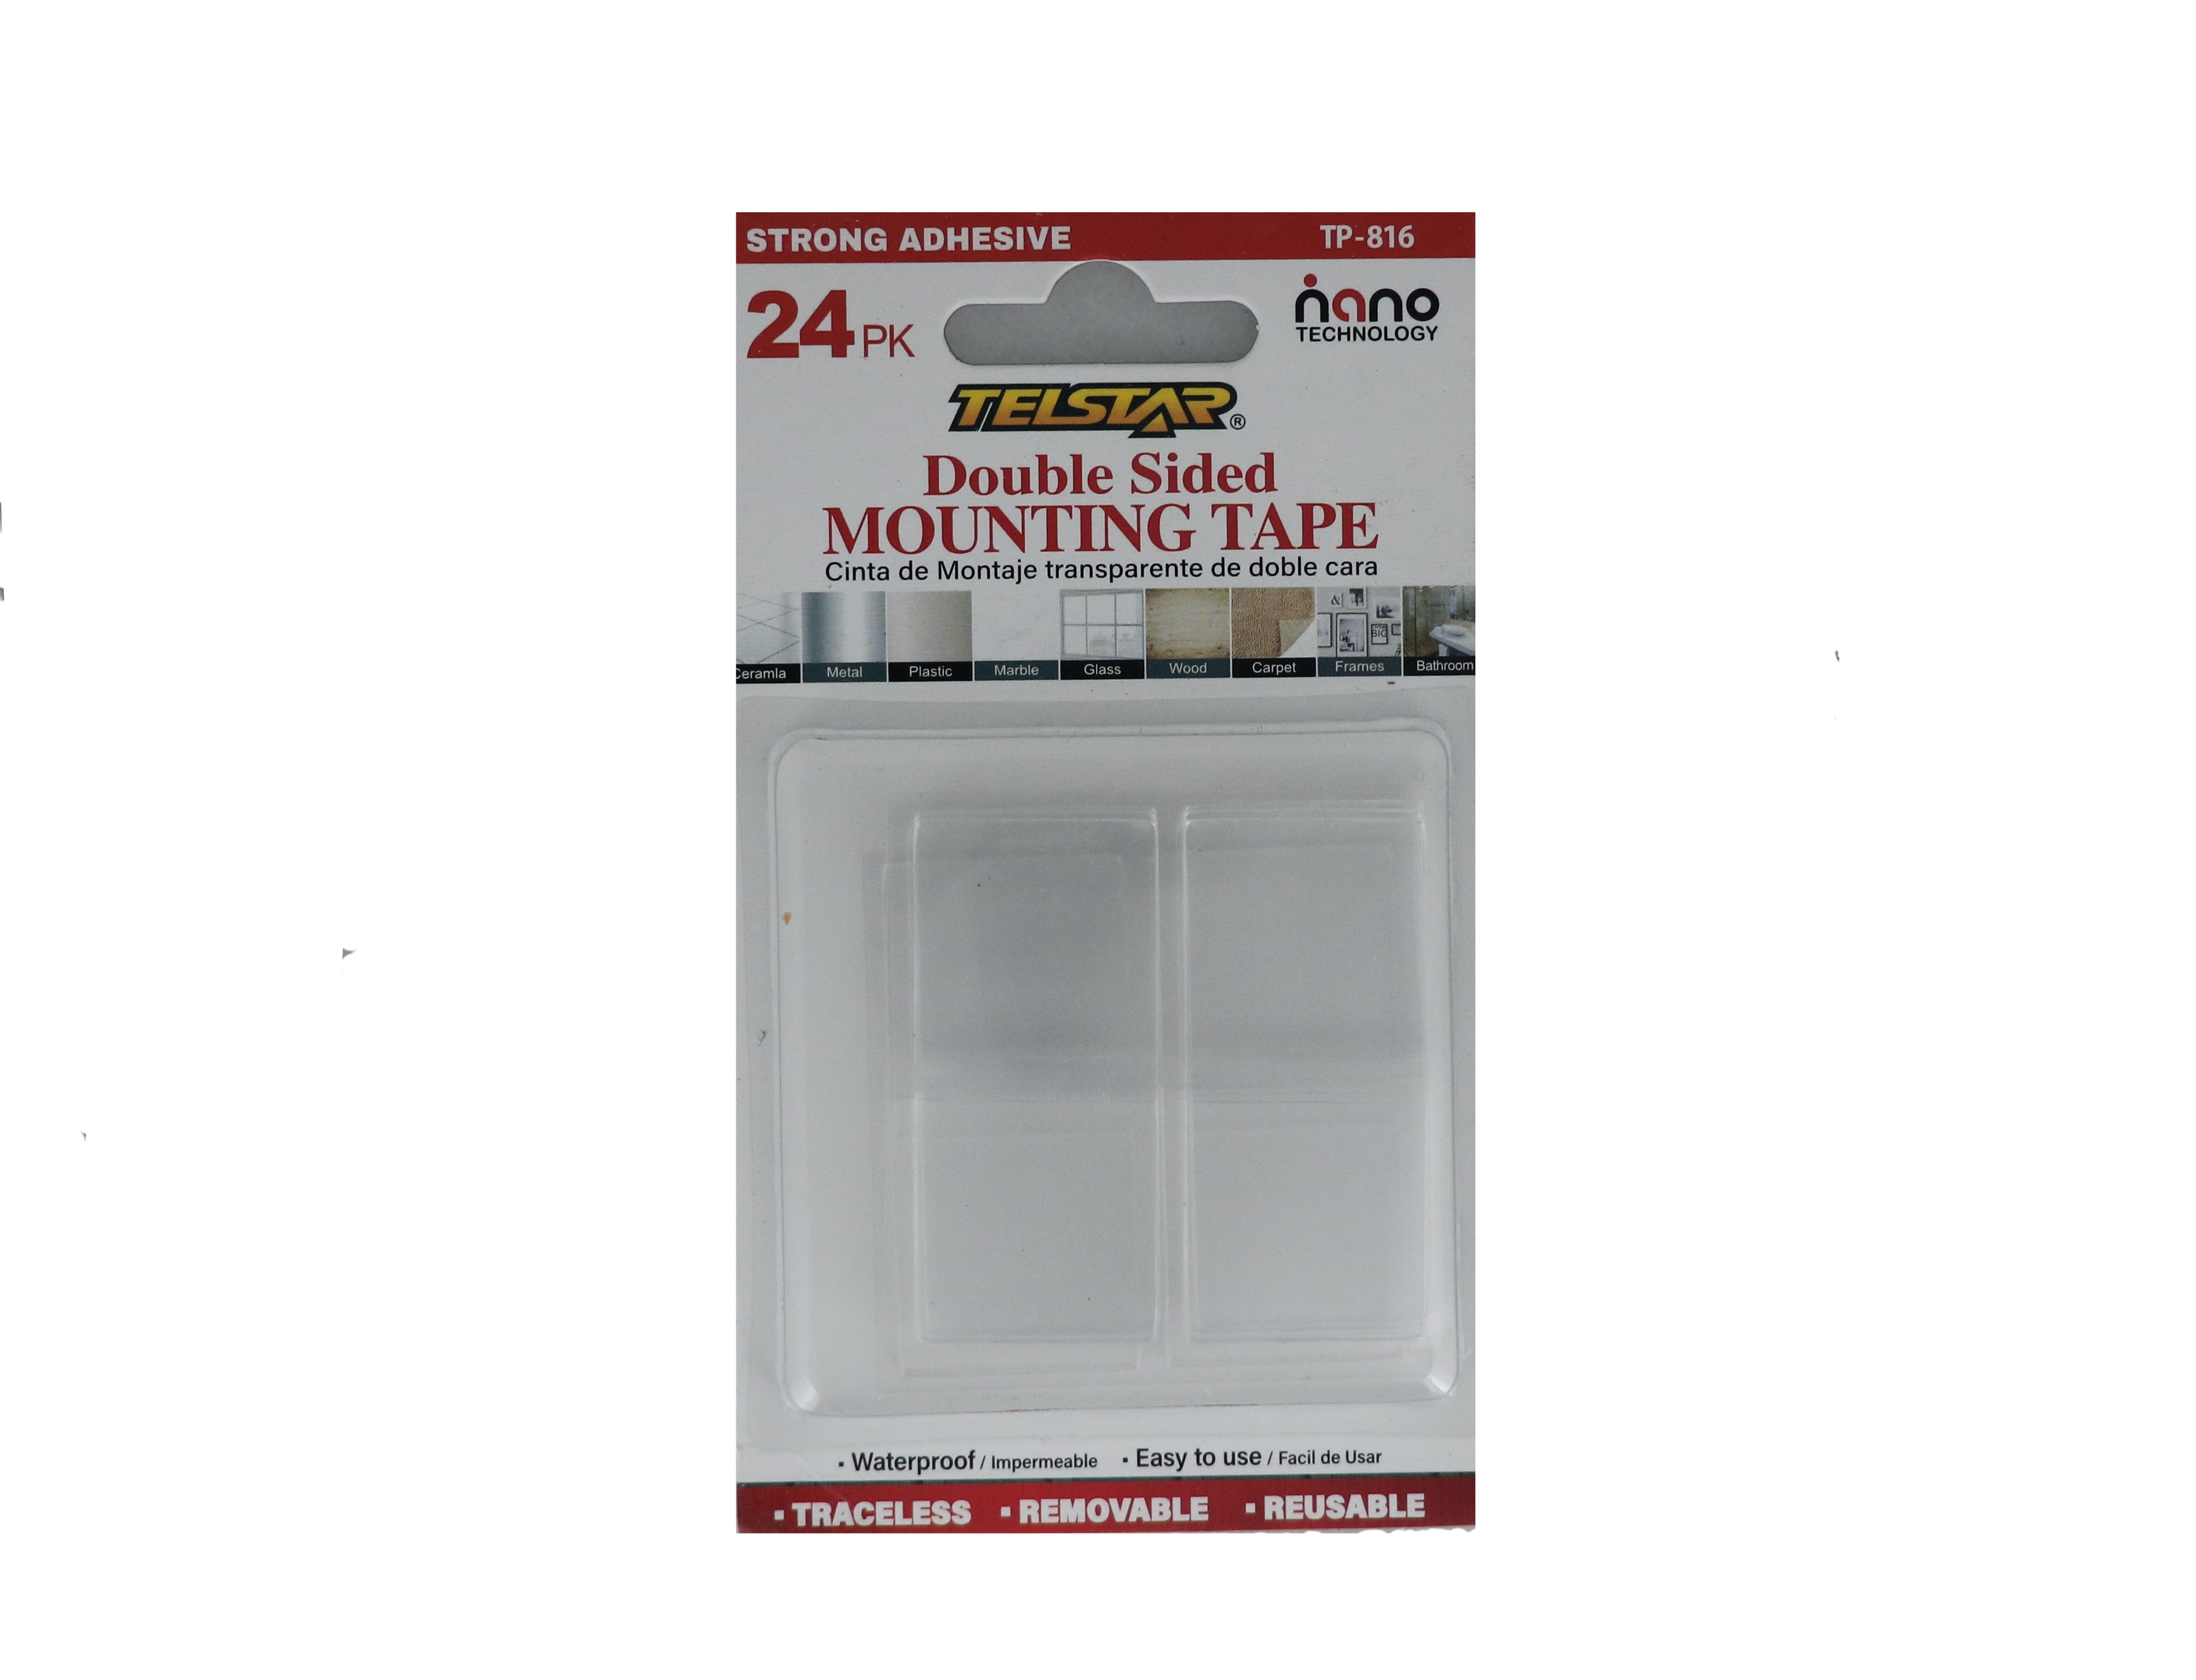 DOUBLE SIDED MOUTAIN TAPE